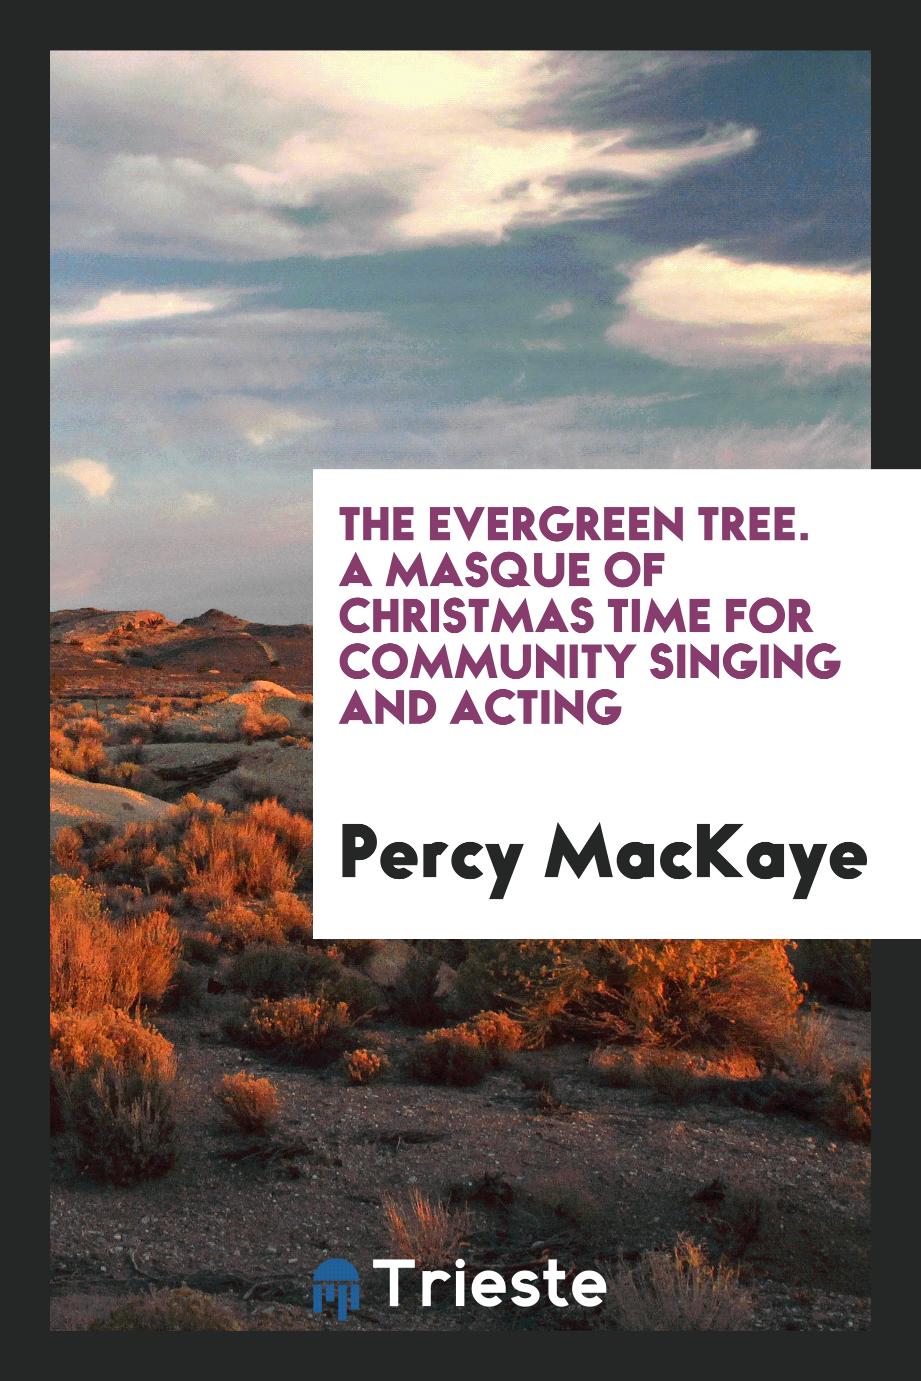 The Evergreen Tree. A Masque of Christmas Time for Community Singing and Acting